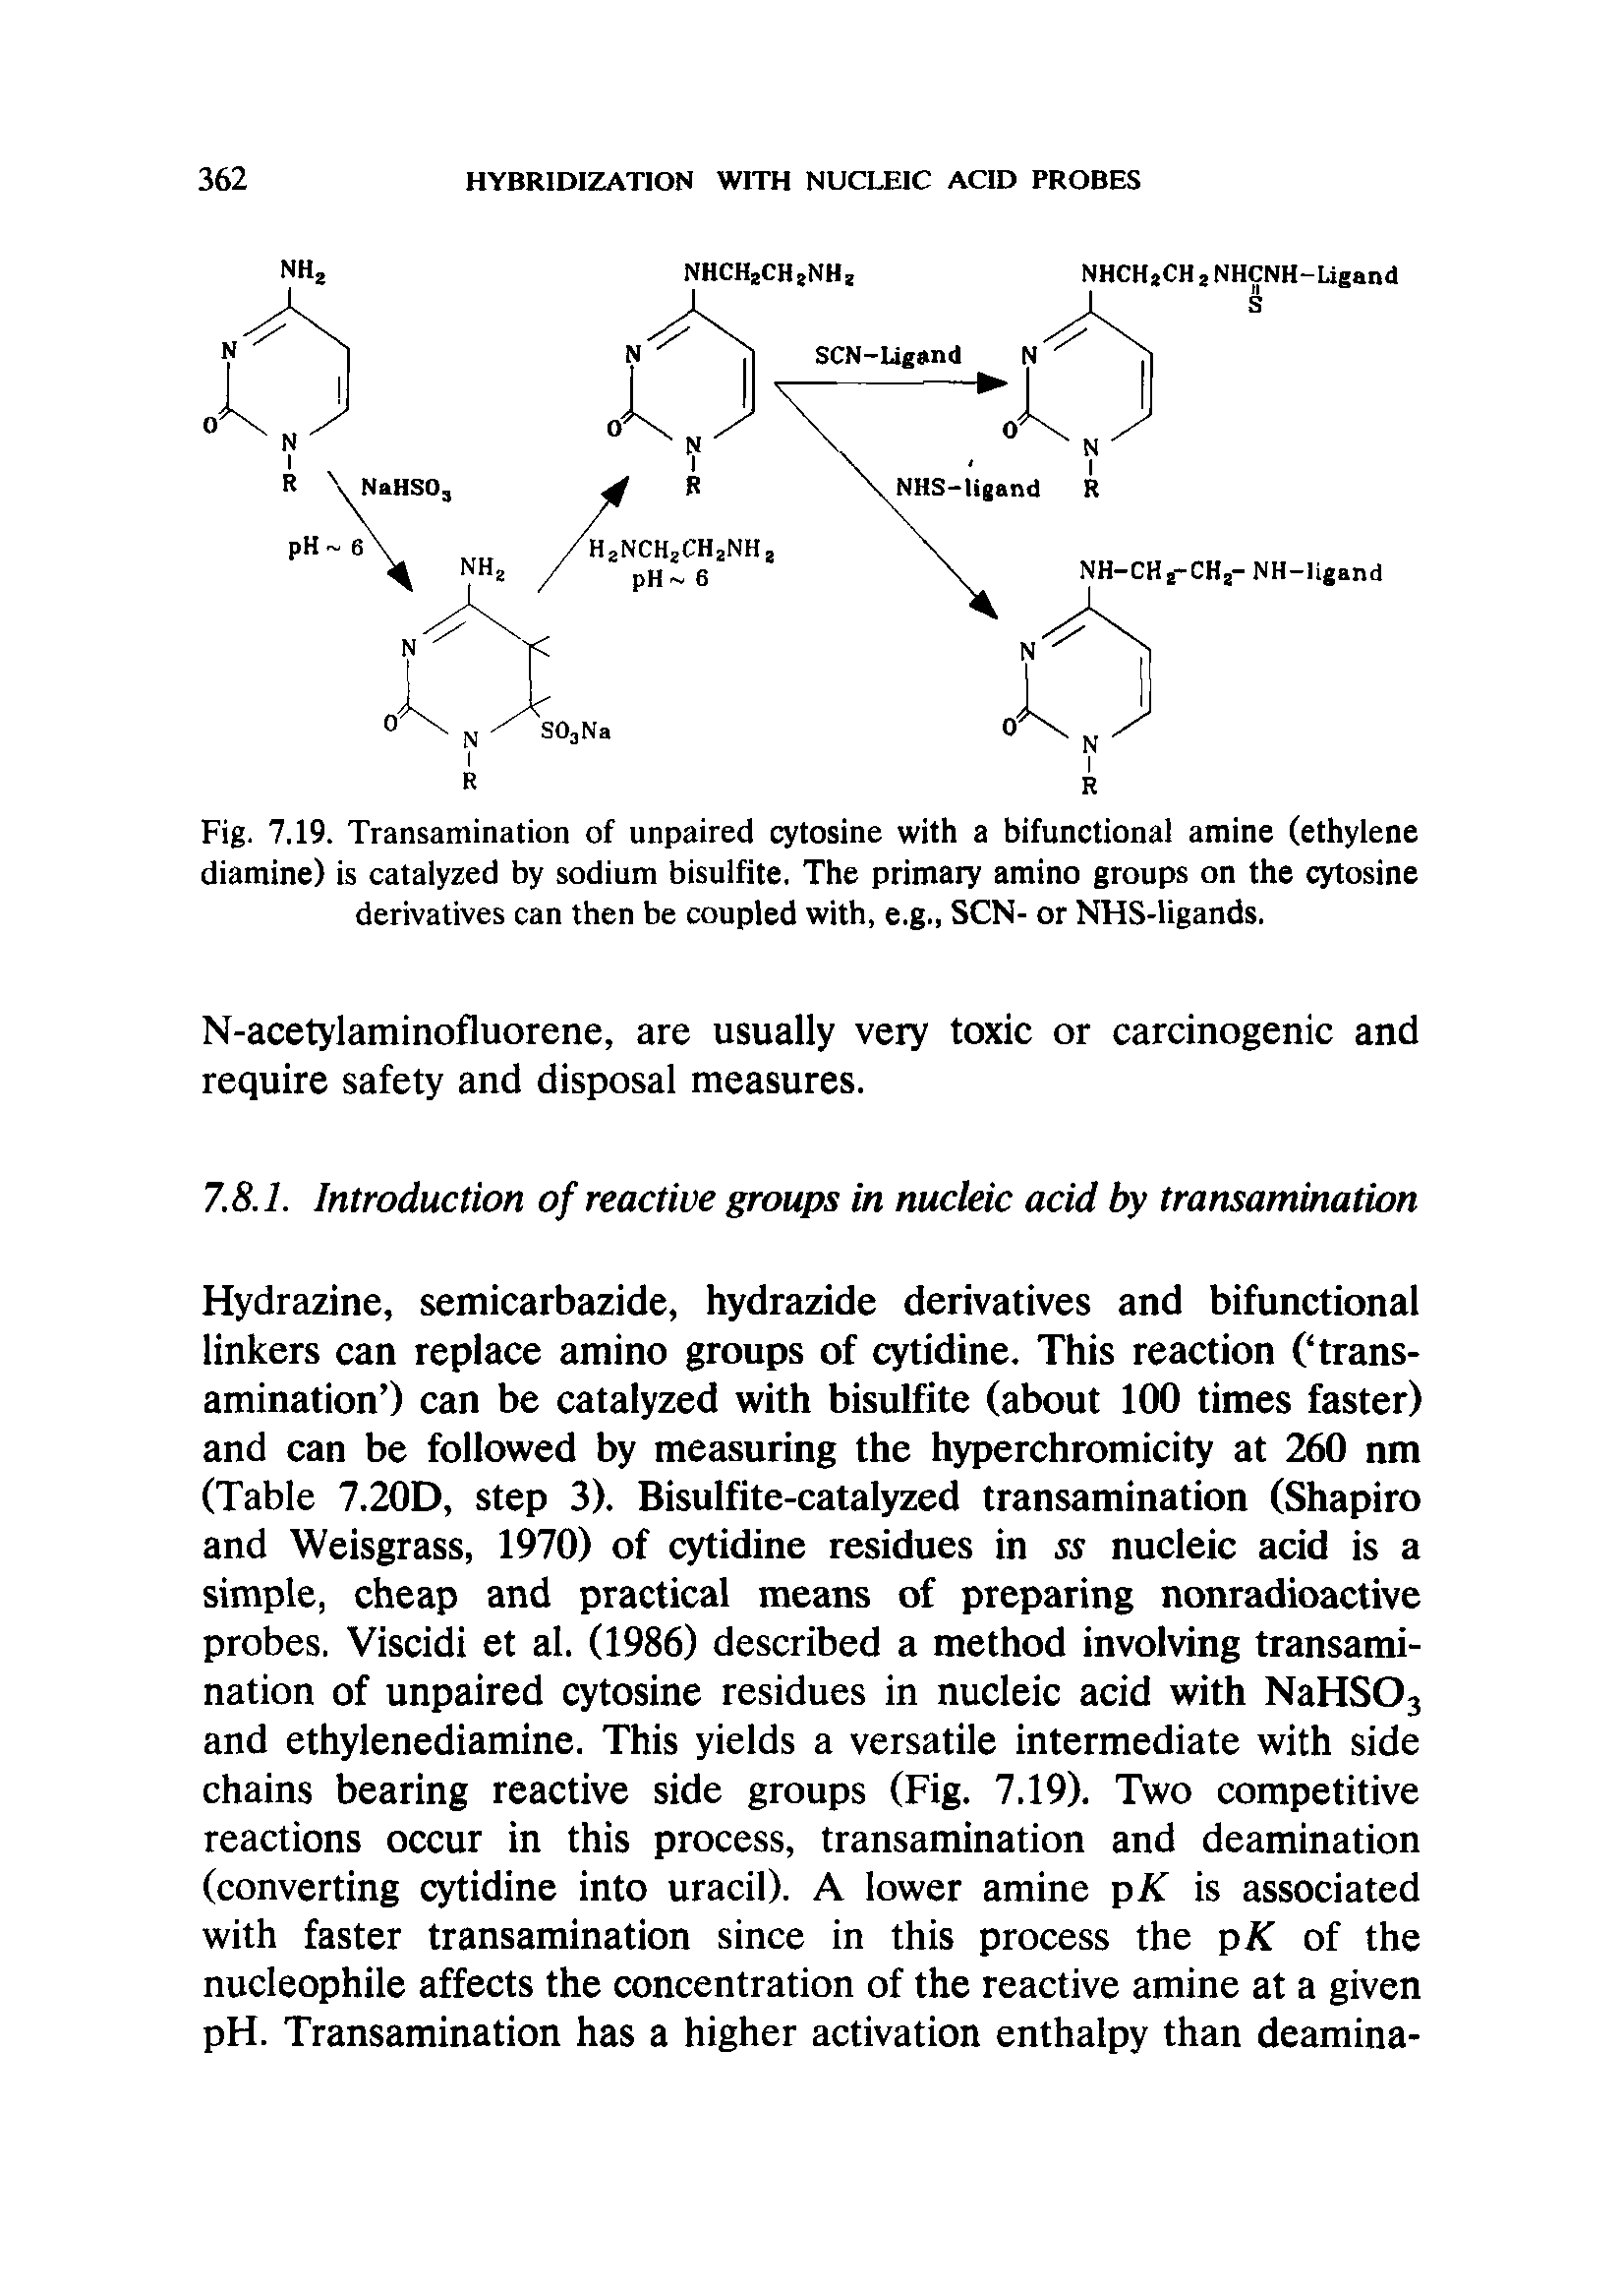 Fig. 7.19. Transamination of unpaired cytosine with a bifunctional amine (ethylene diamine) is catalyzed by sodium bisulfite. The primary amino groups on the cytosine derivatives can then be coupled with, e.g., SCN- or NHS-ligands.